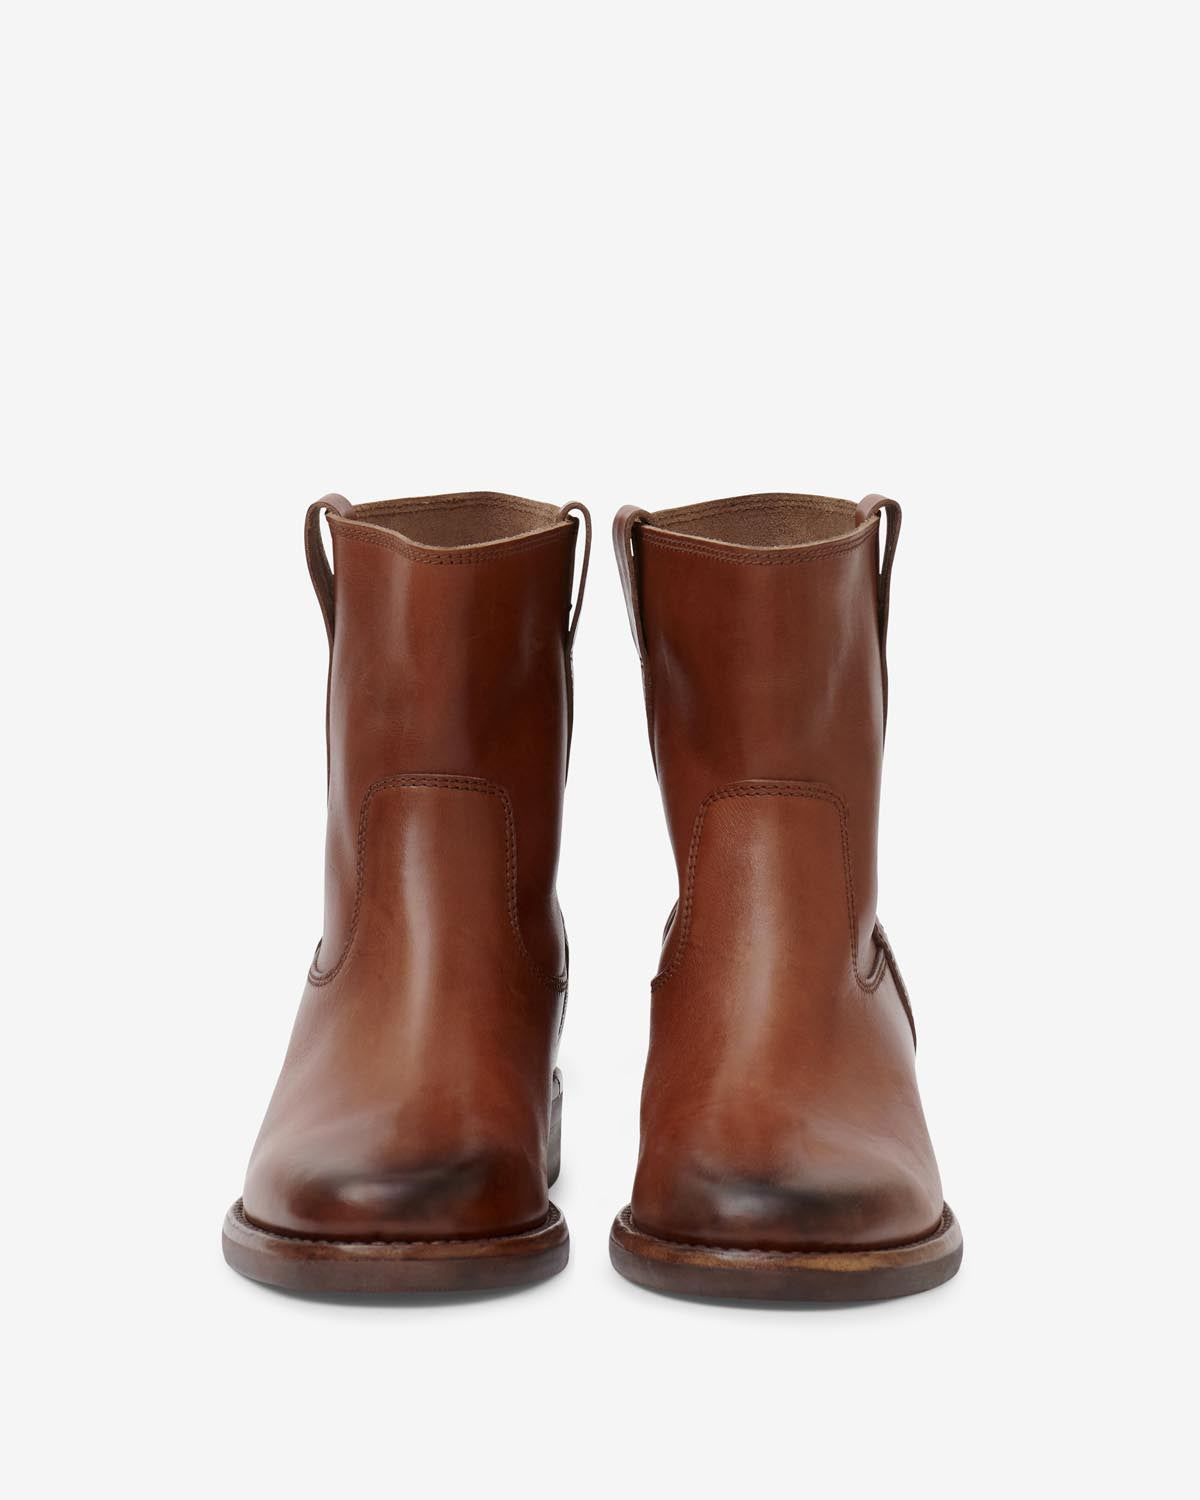 Susee low boots Woman Cognac 4